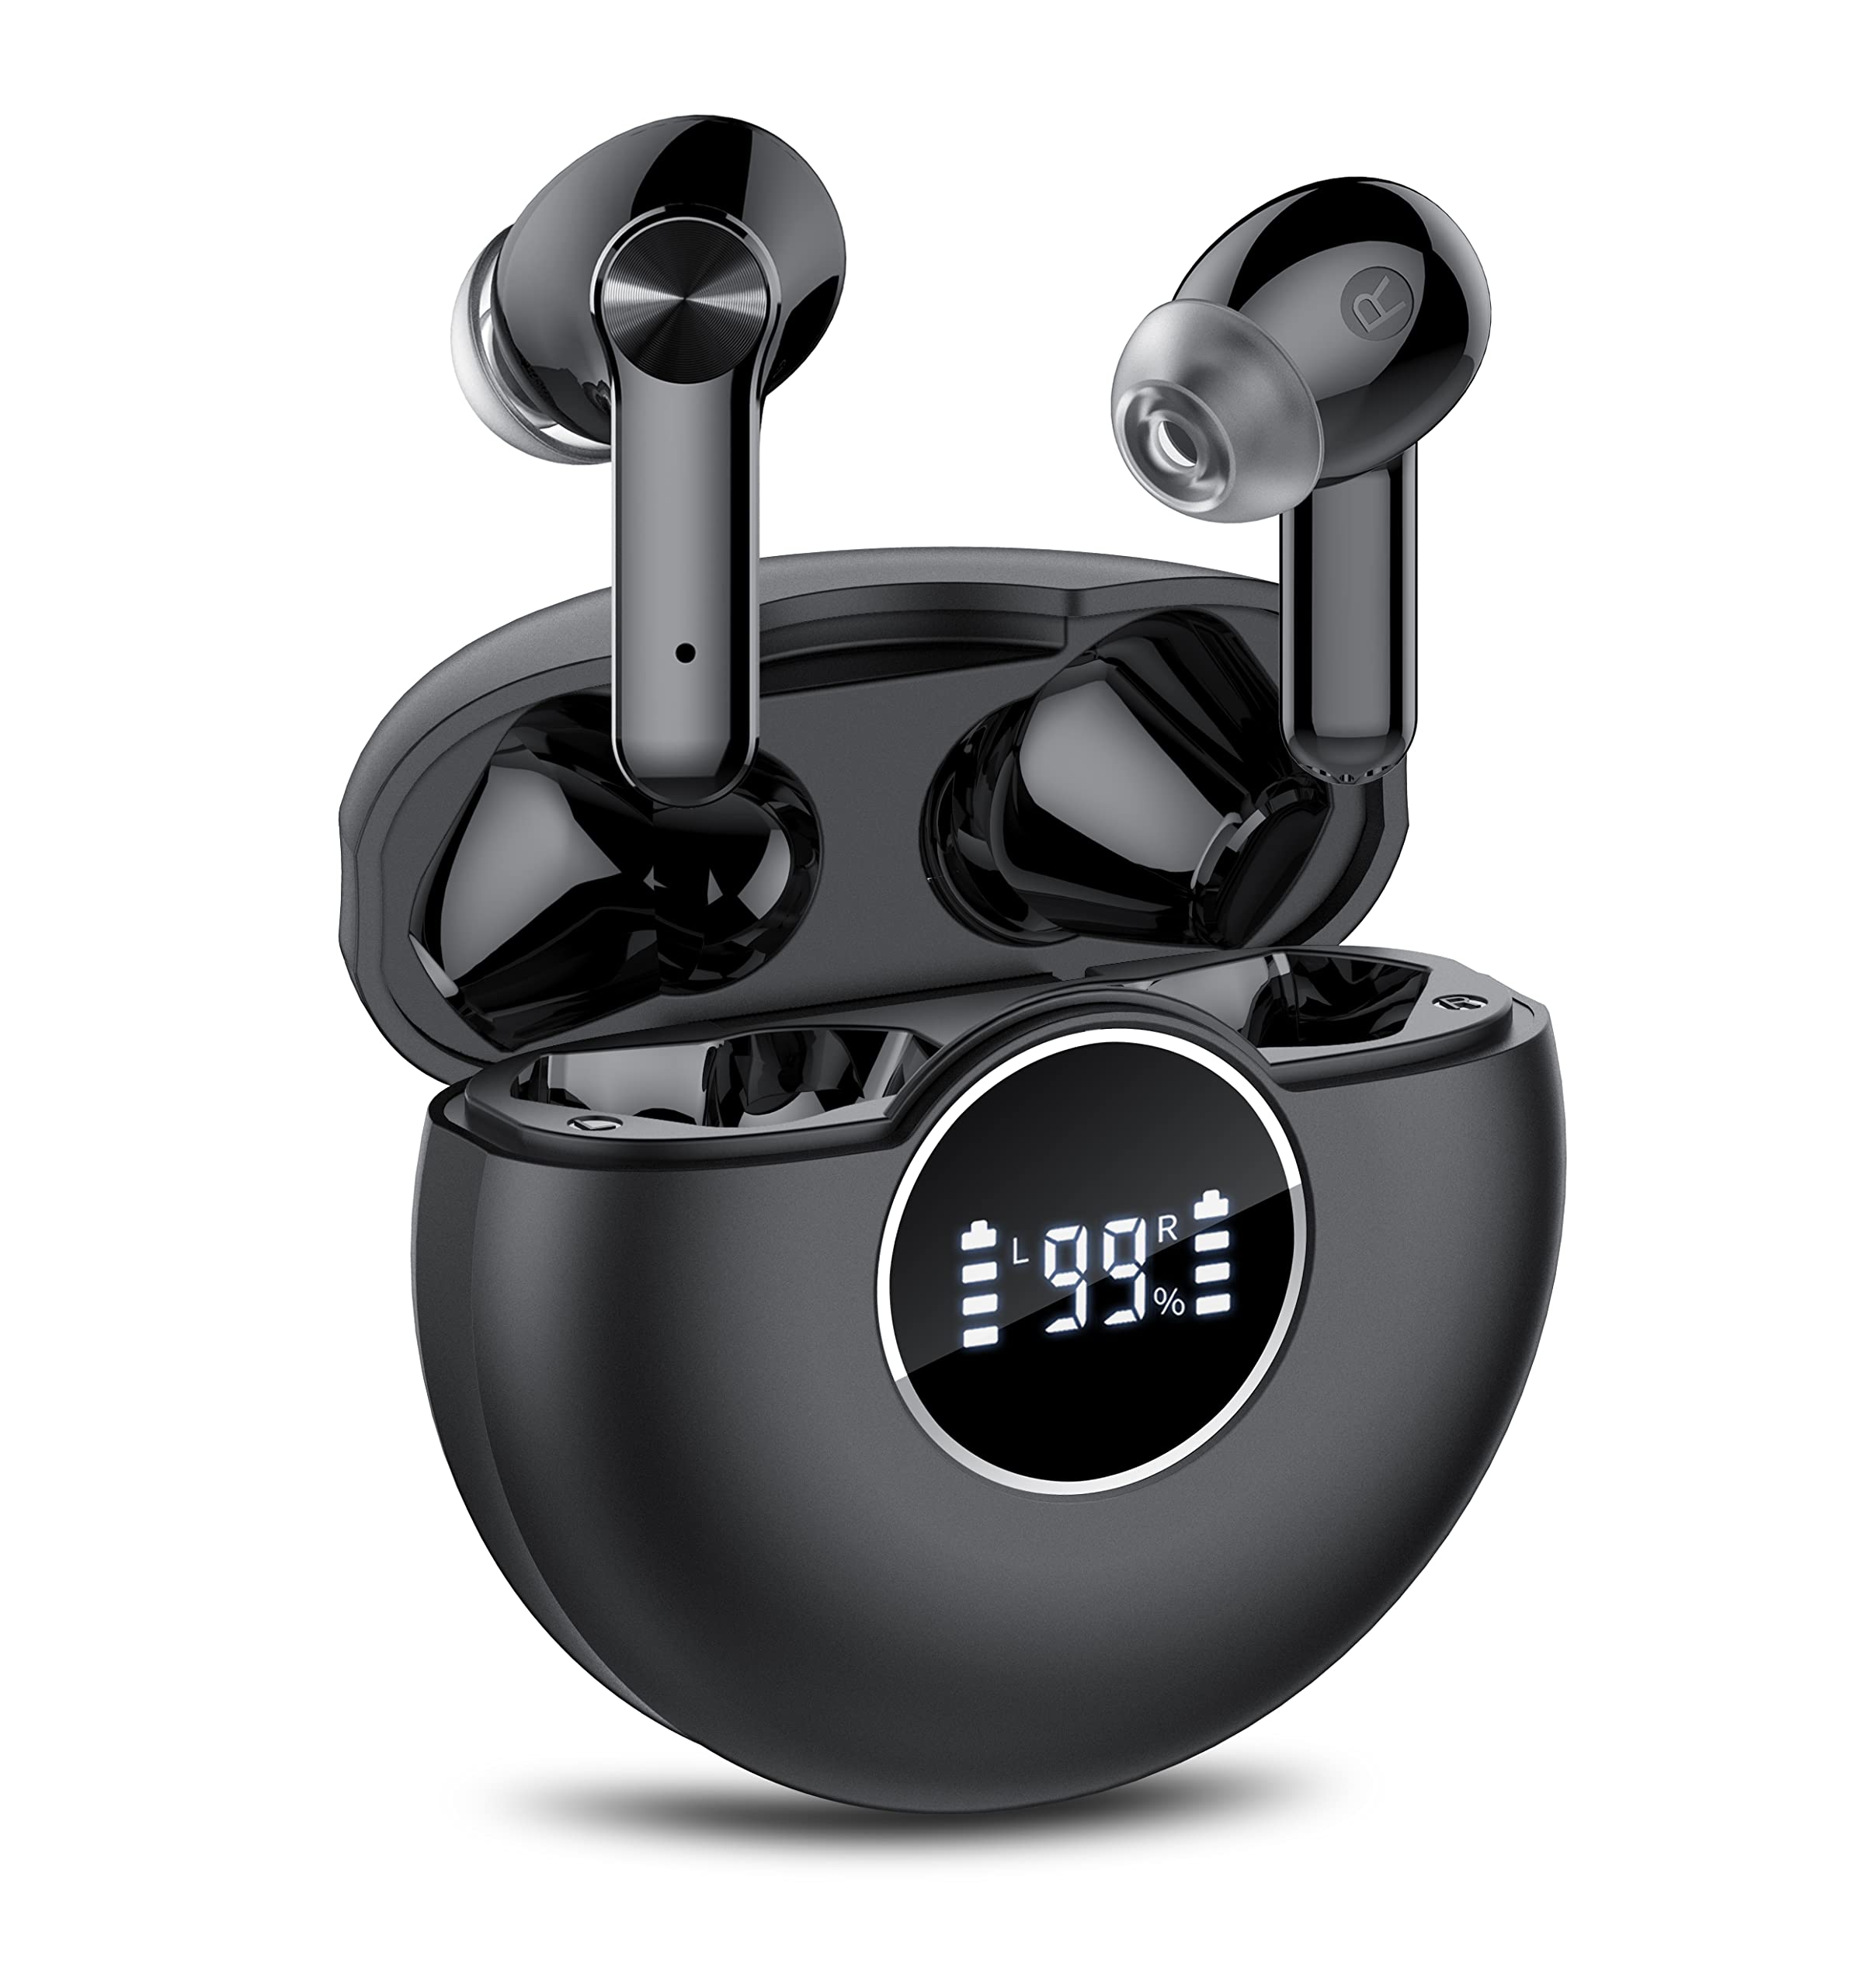 Wireless Earbuds, Bluetooth 5.2 Wireless Headphones With Mics, 48H Playtime with LED Power Display, Deep Bass, USB-C Fast Charging, Touch Control, IPX7 Waterproof Wireless Earphones for Work/Sport